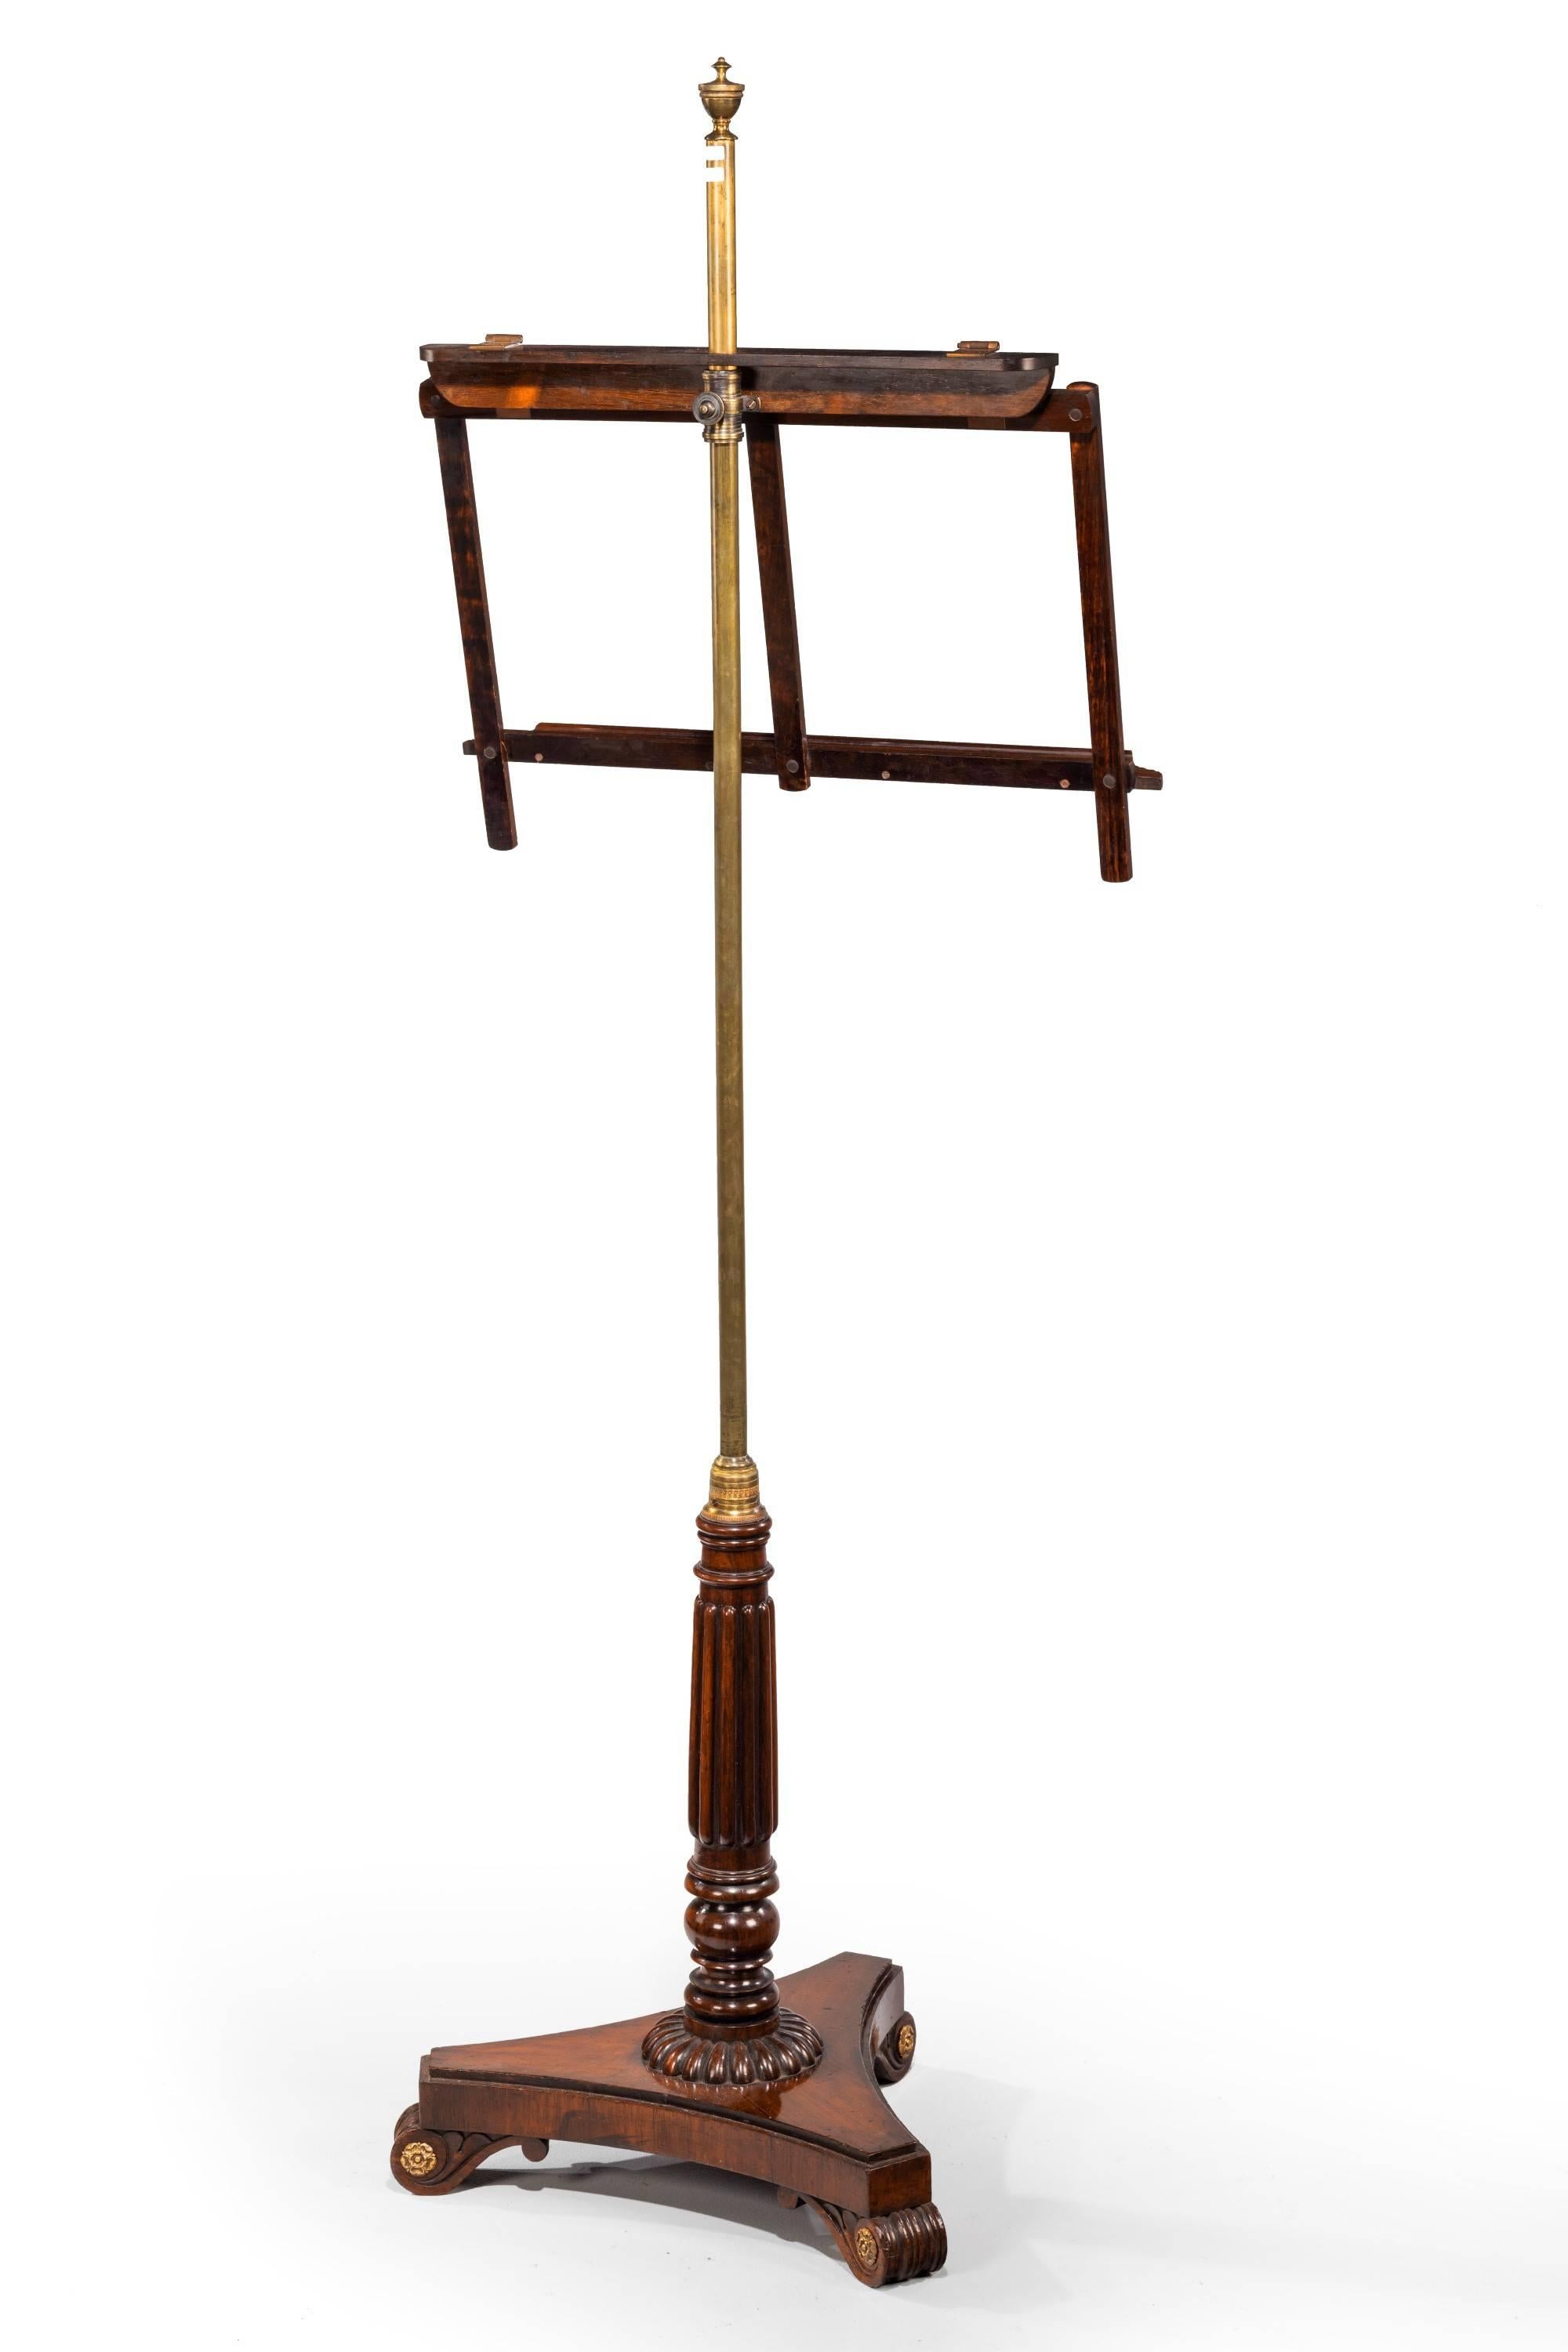 English Regency Period Music Stand